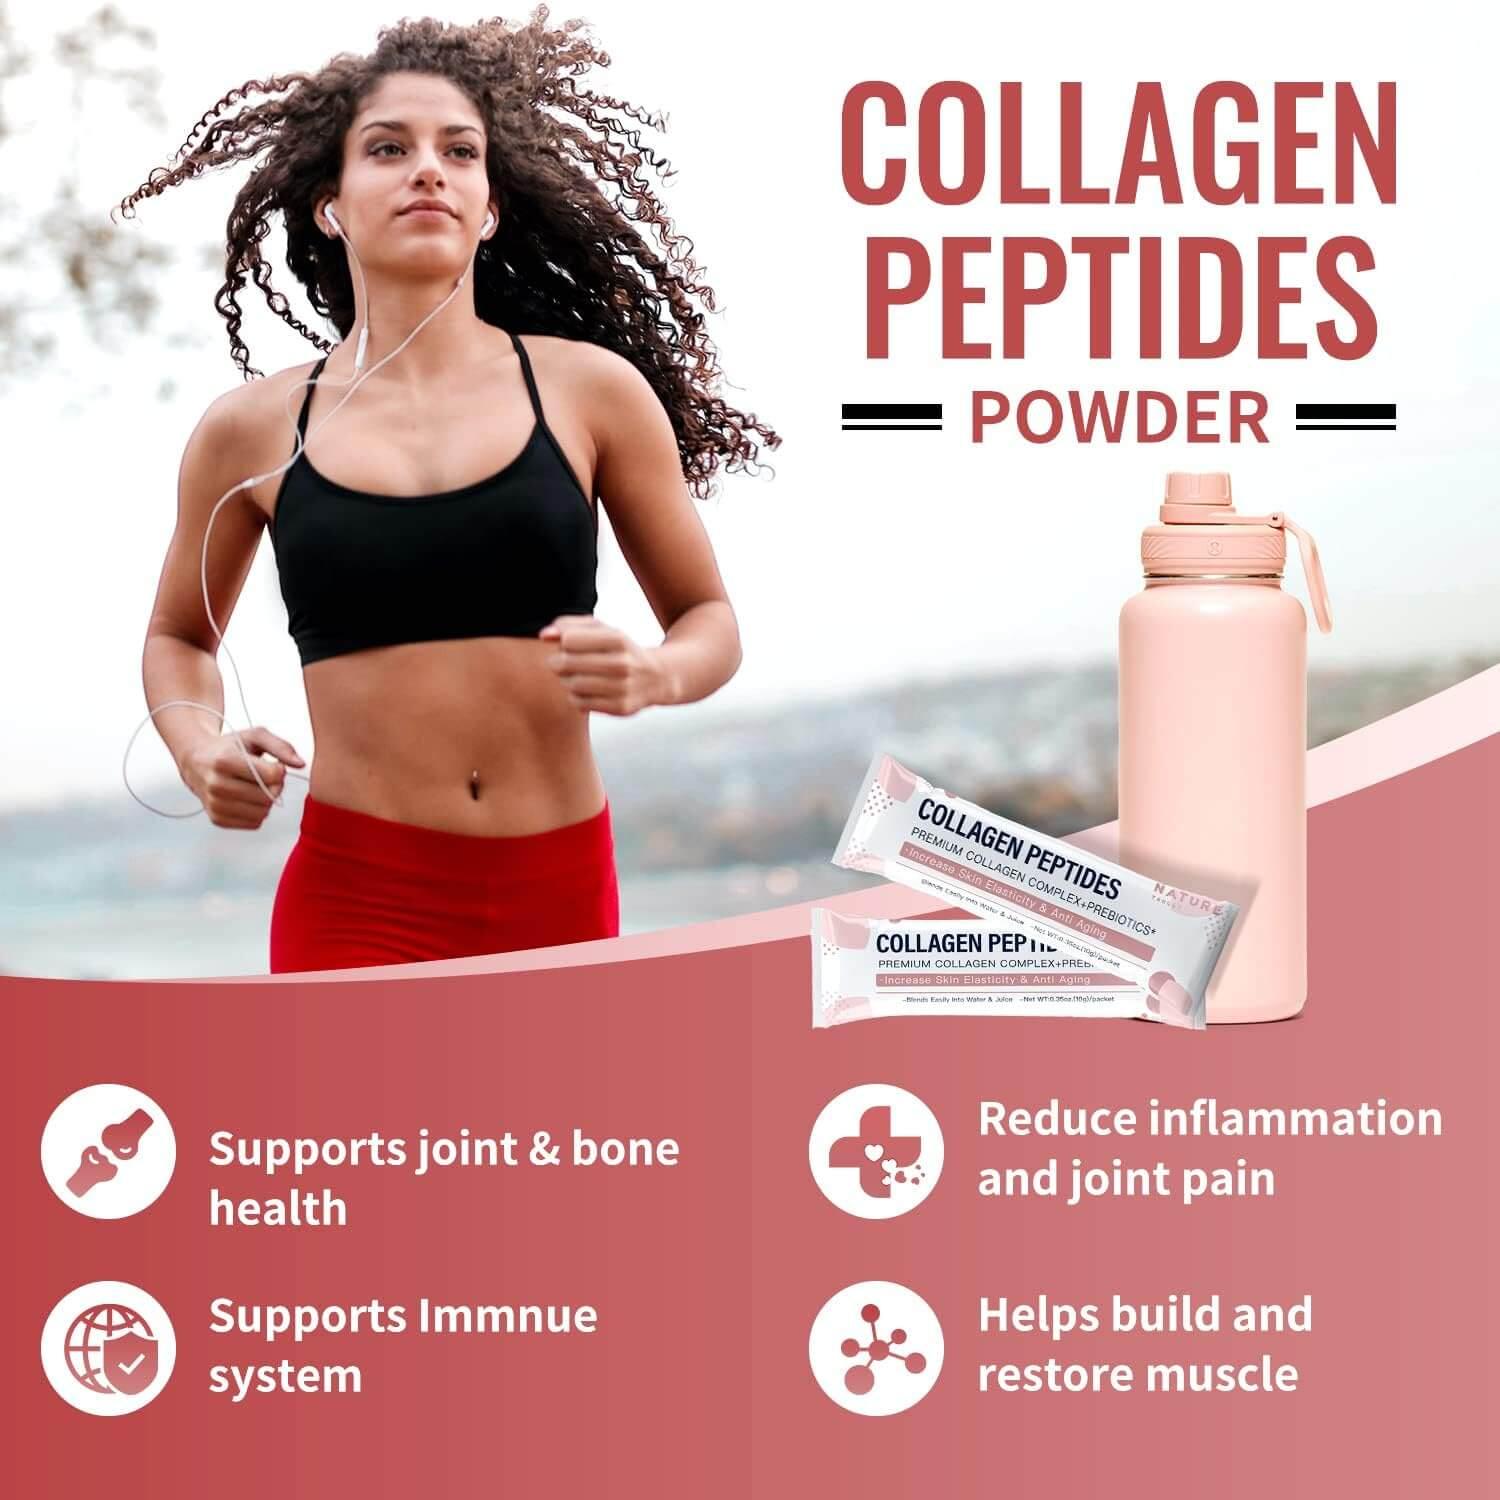 What does Collagen Peptides Powder do?